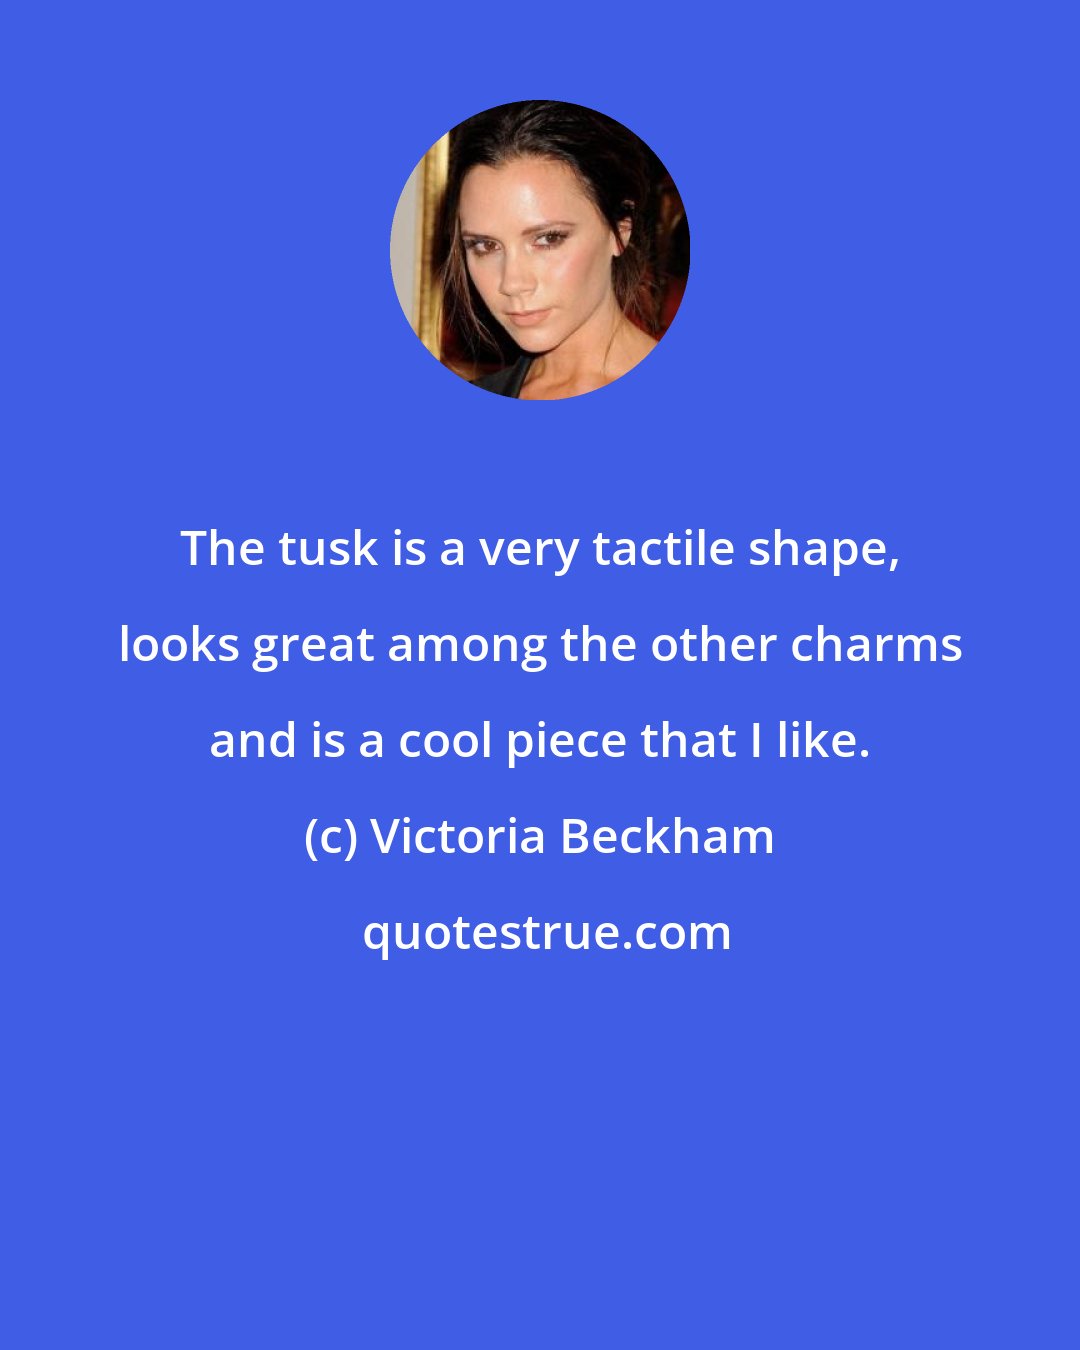 Victoria Beckham: The tusk is a very tactile shape, looks great among the other charms and is a cool piece that I like.